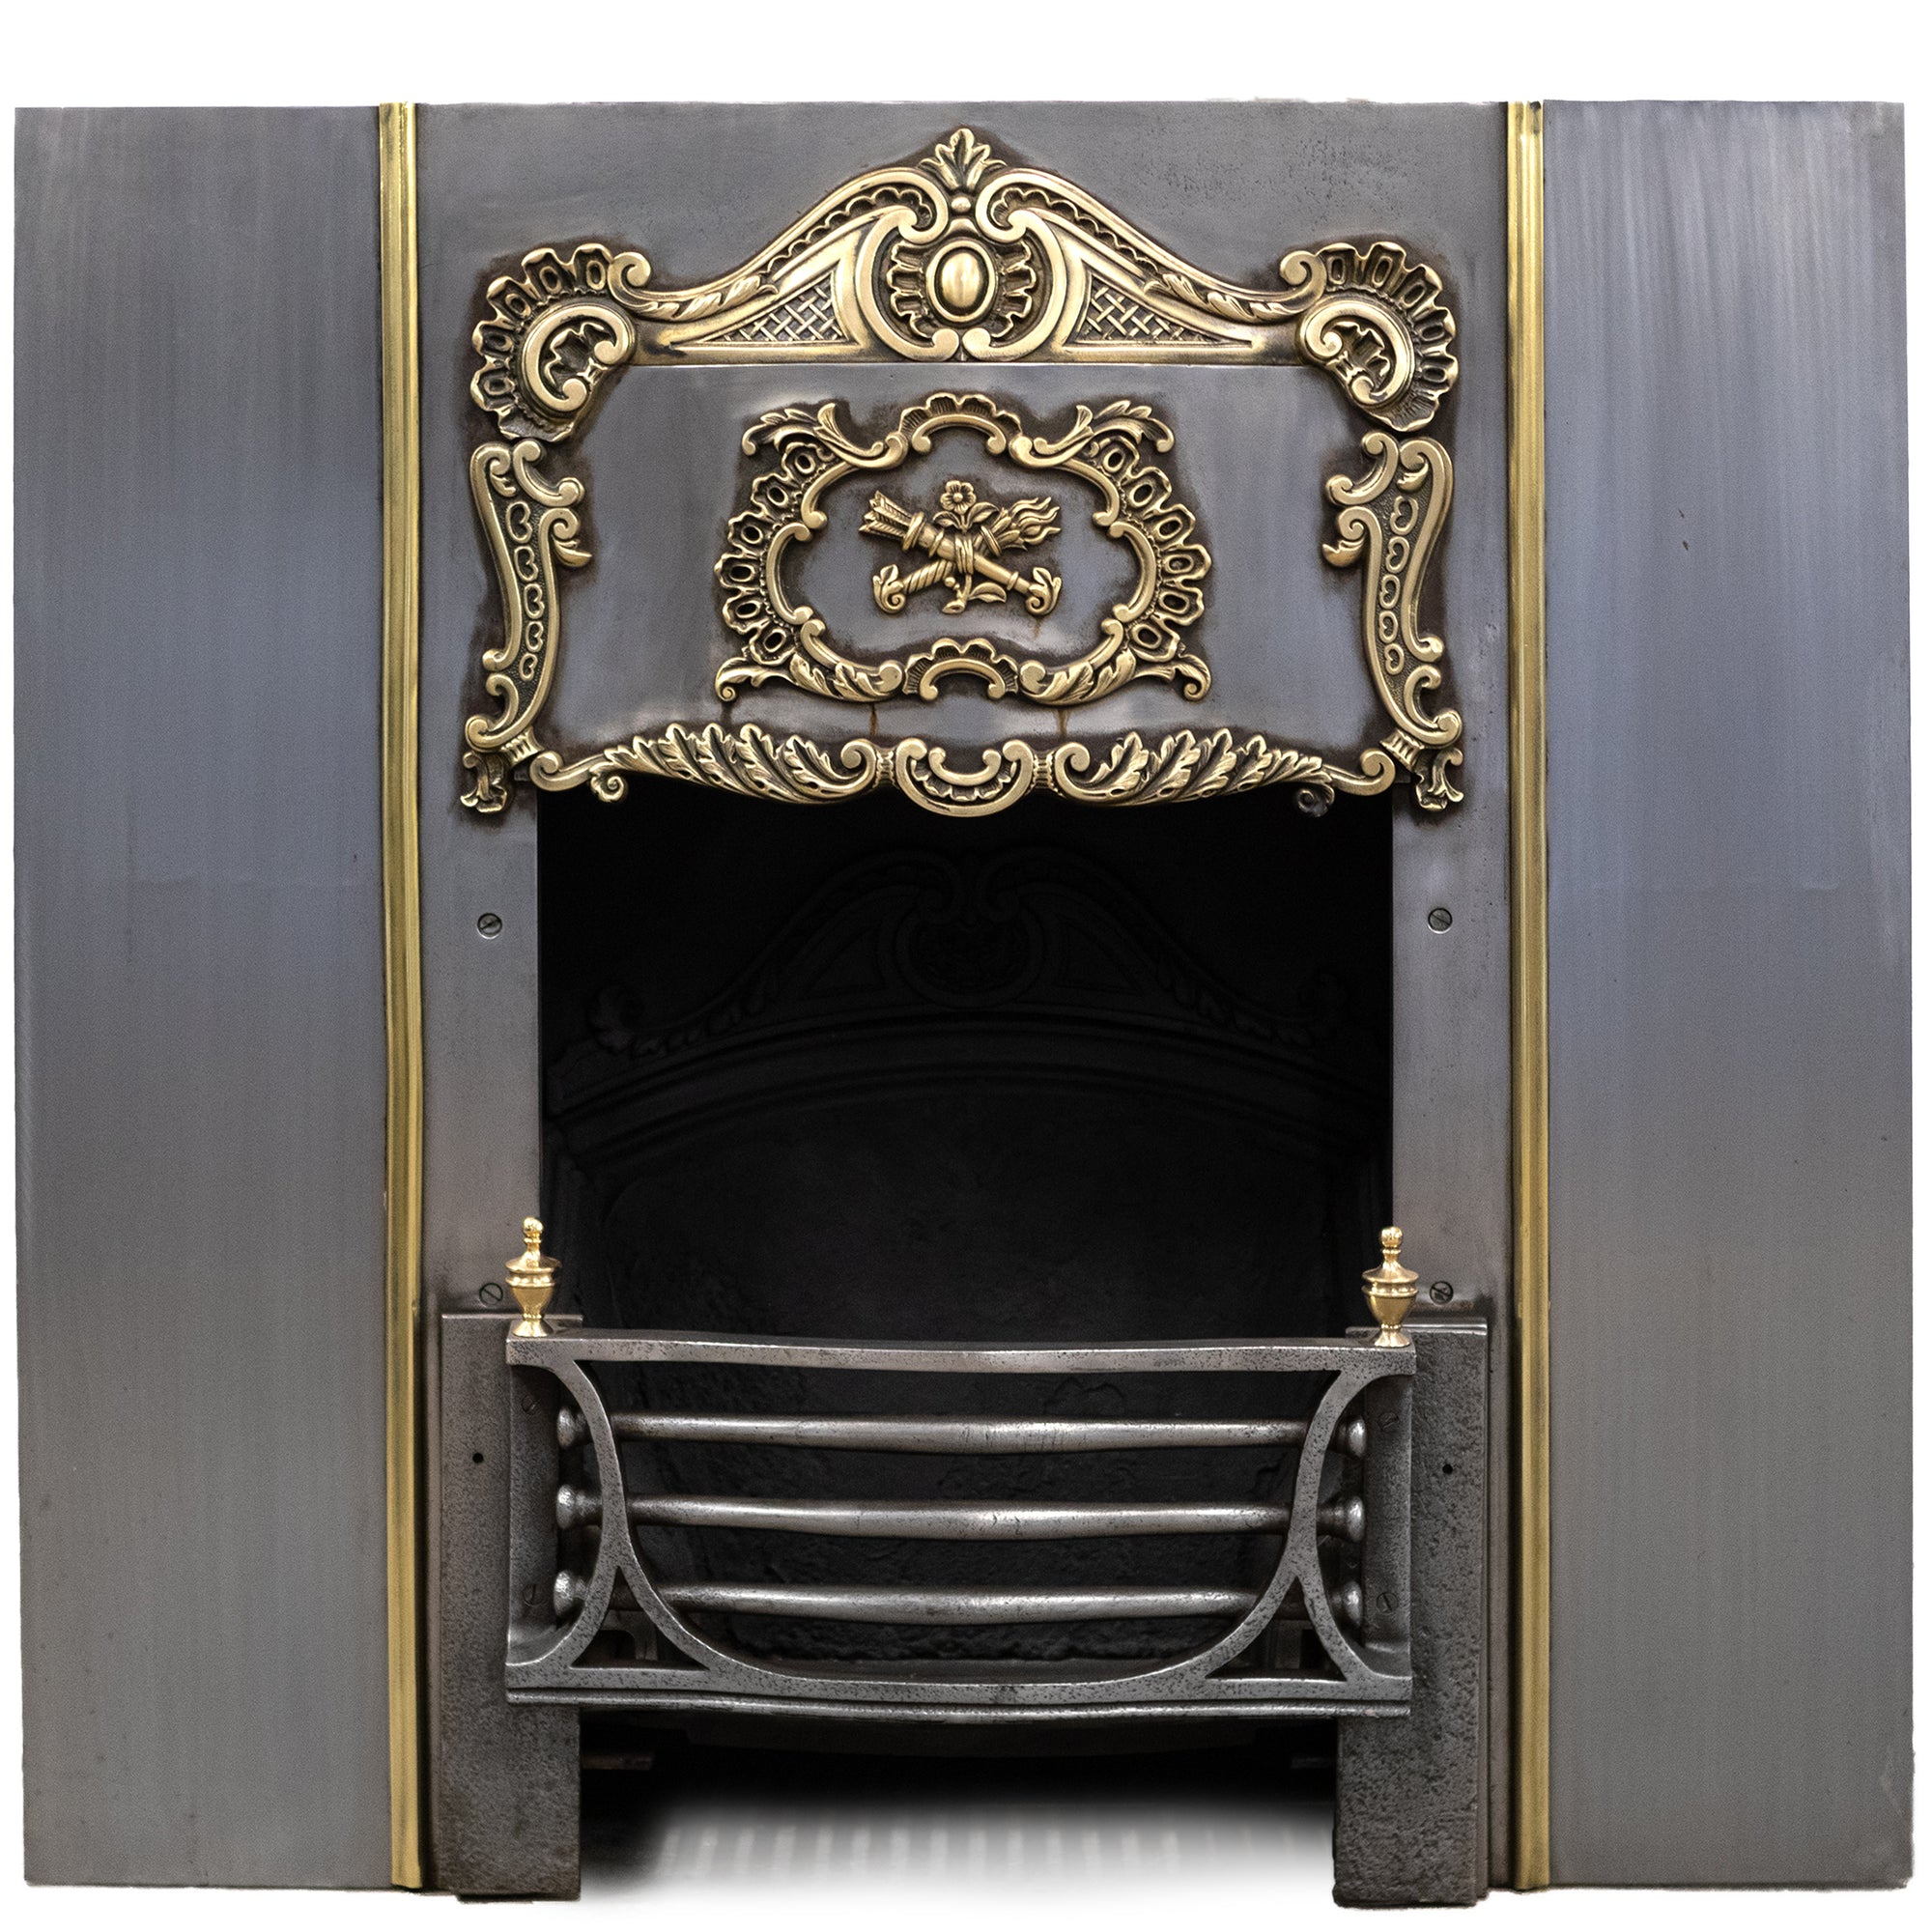 Ornate Antique Polished Cast Iron & Brass Fireplace Insert | The Architectural Forum